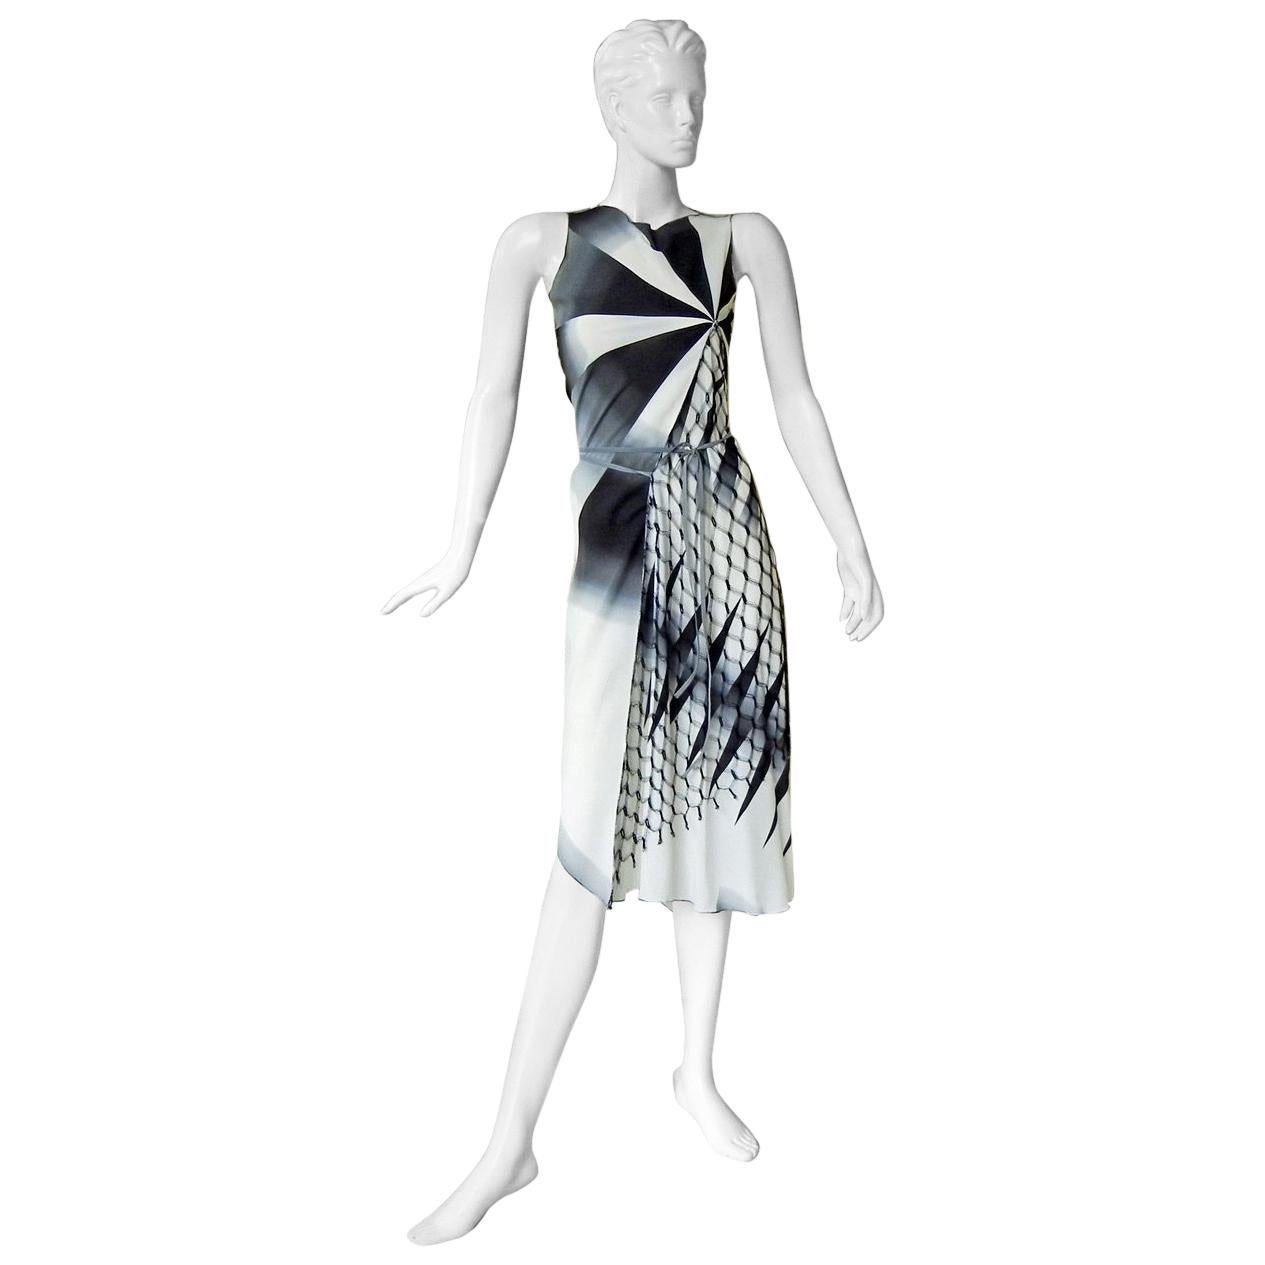  JP Gaultier 2001 Asymmetric dress as seen on the Runway and in AD campaign  New